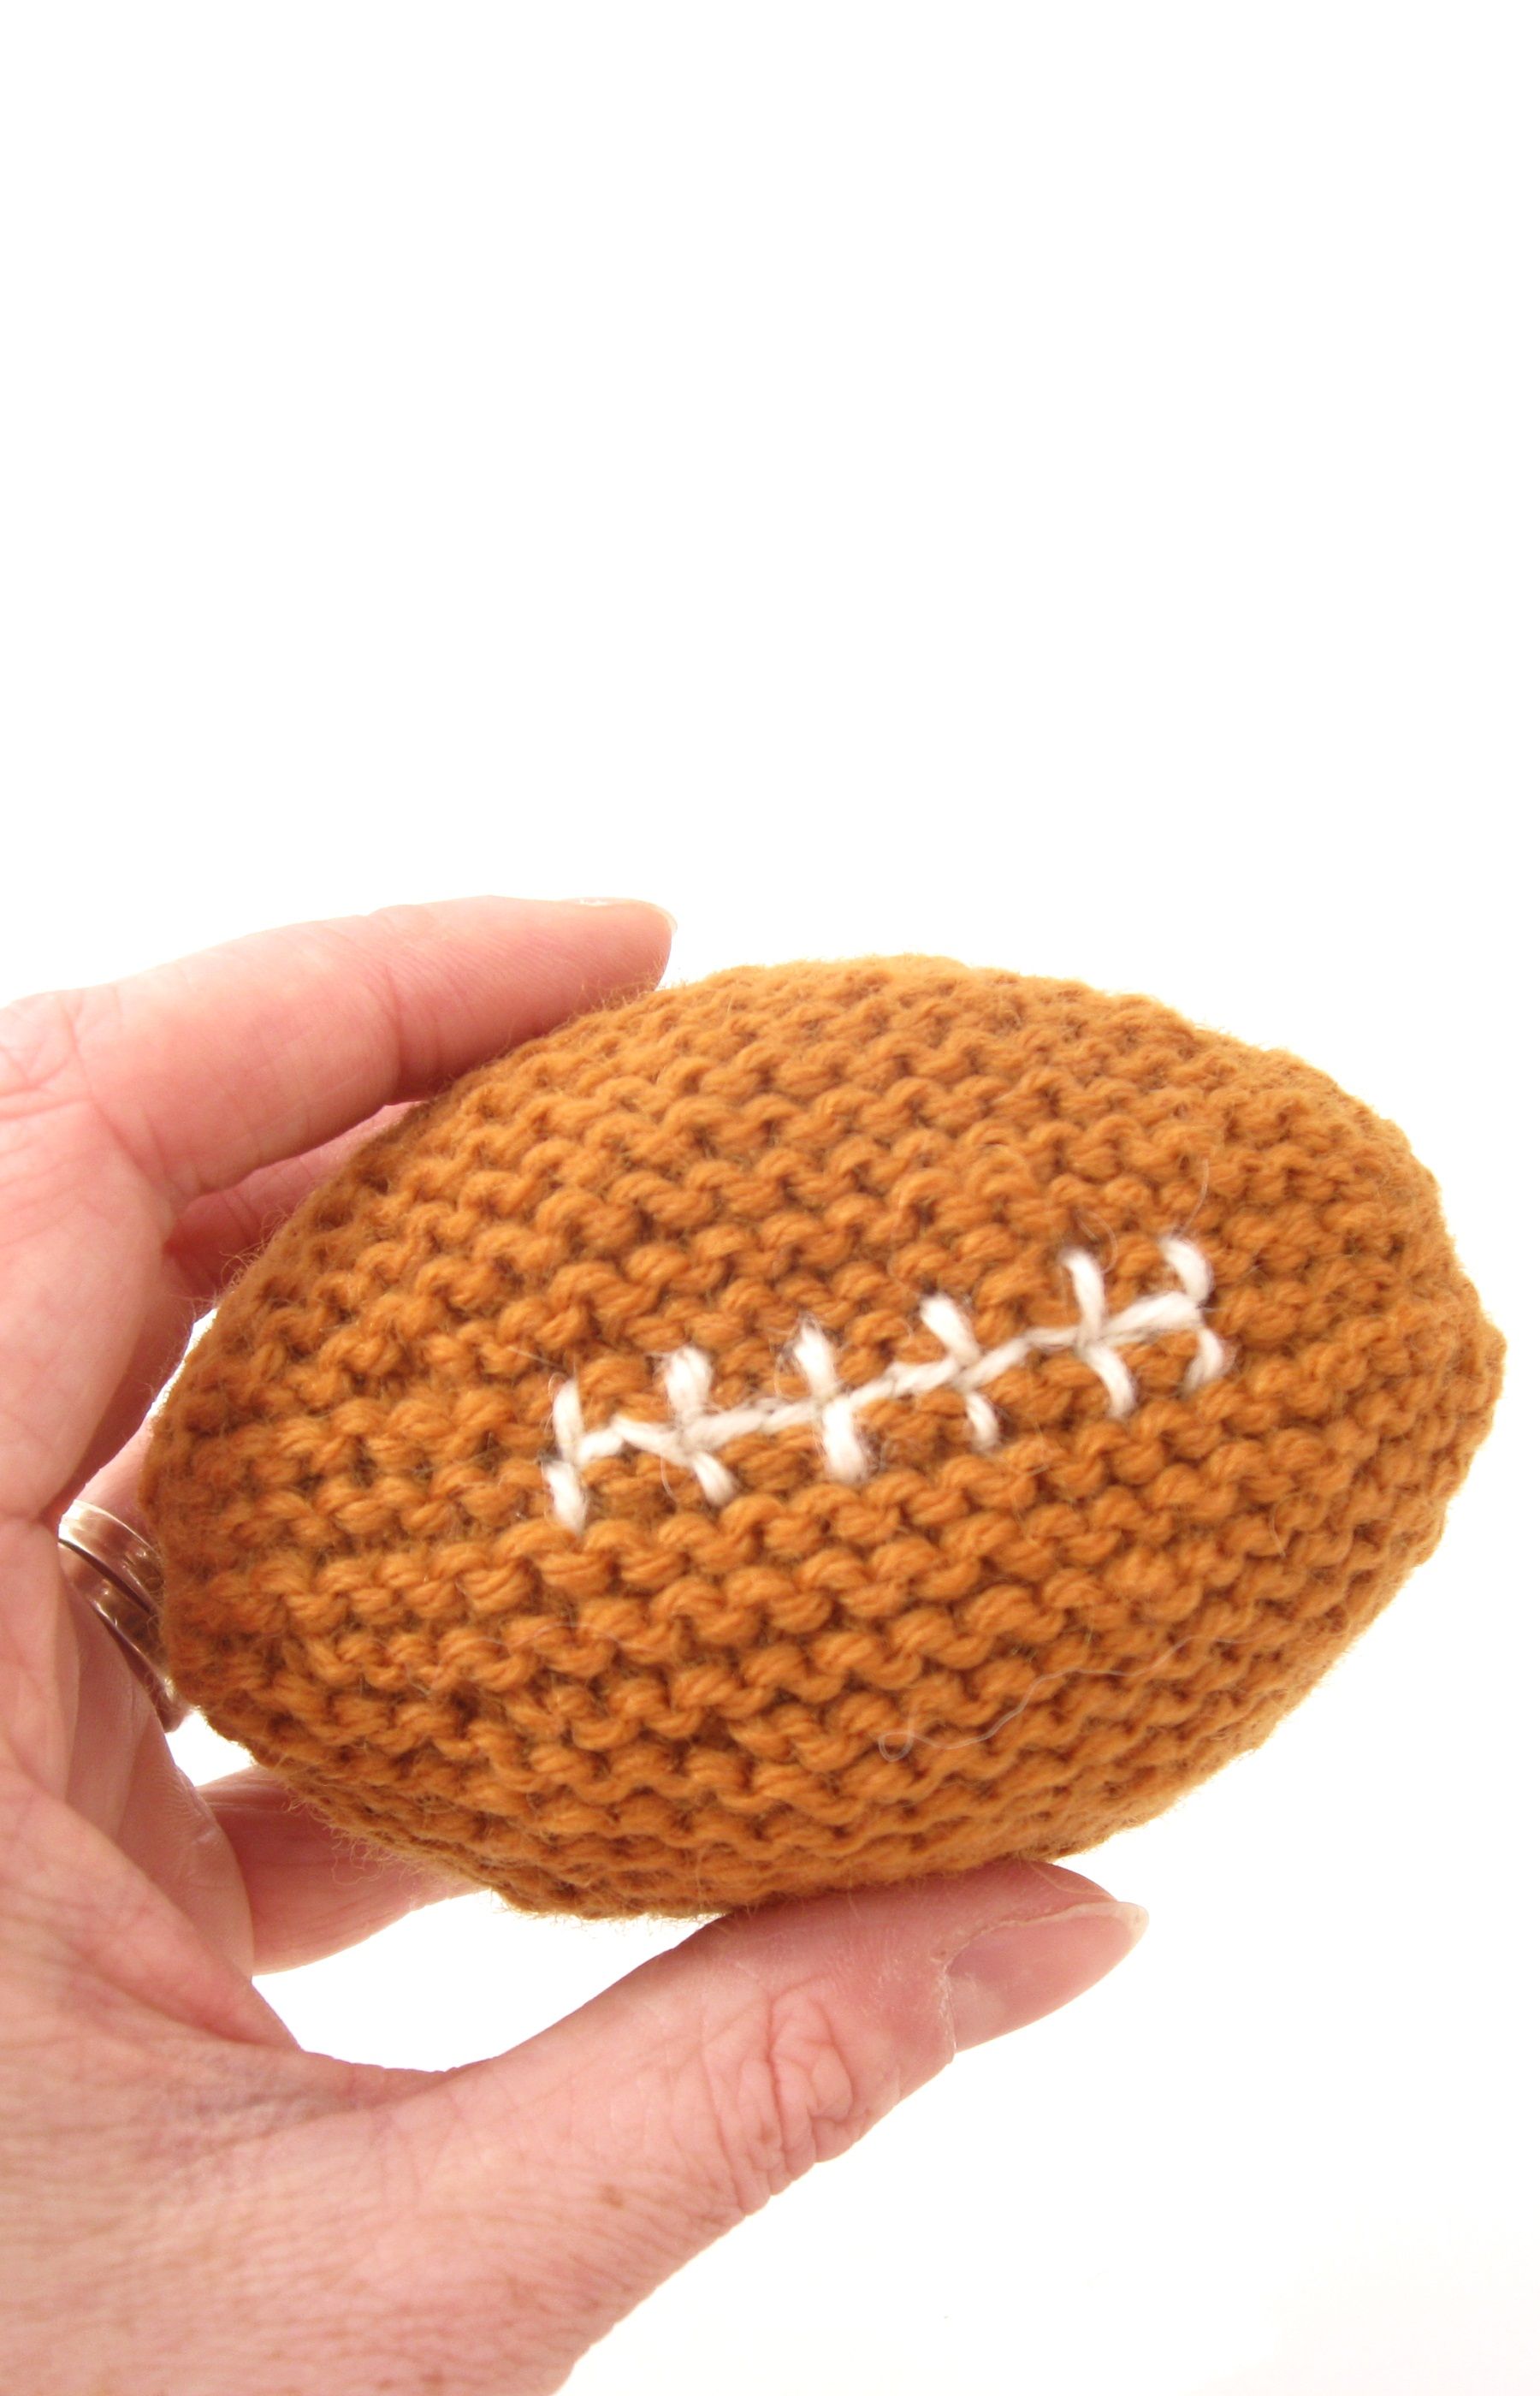 Baby's First Football Pattern - Knitting Patterns and ...